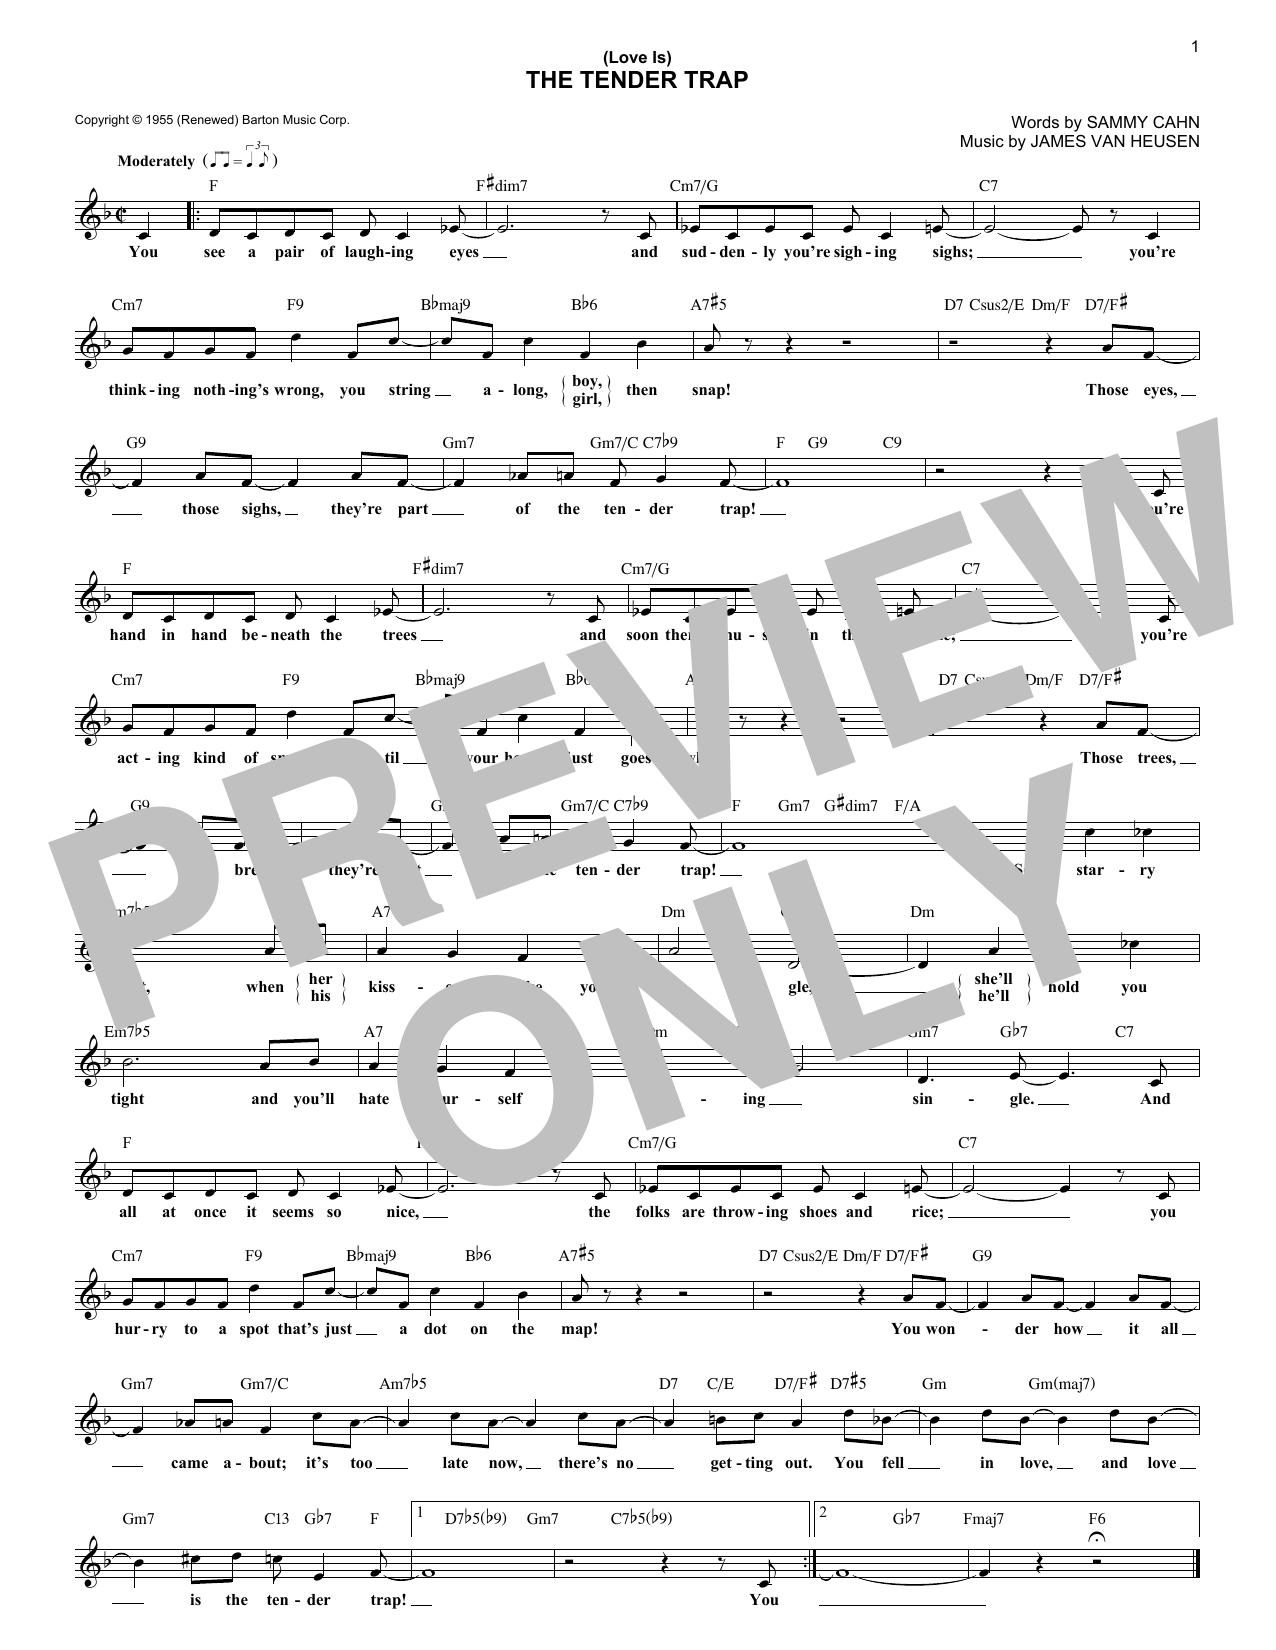 Download Frank Sinatra (Love Is) The Tender Trap Sheet Music